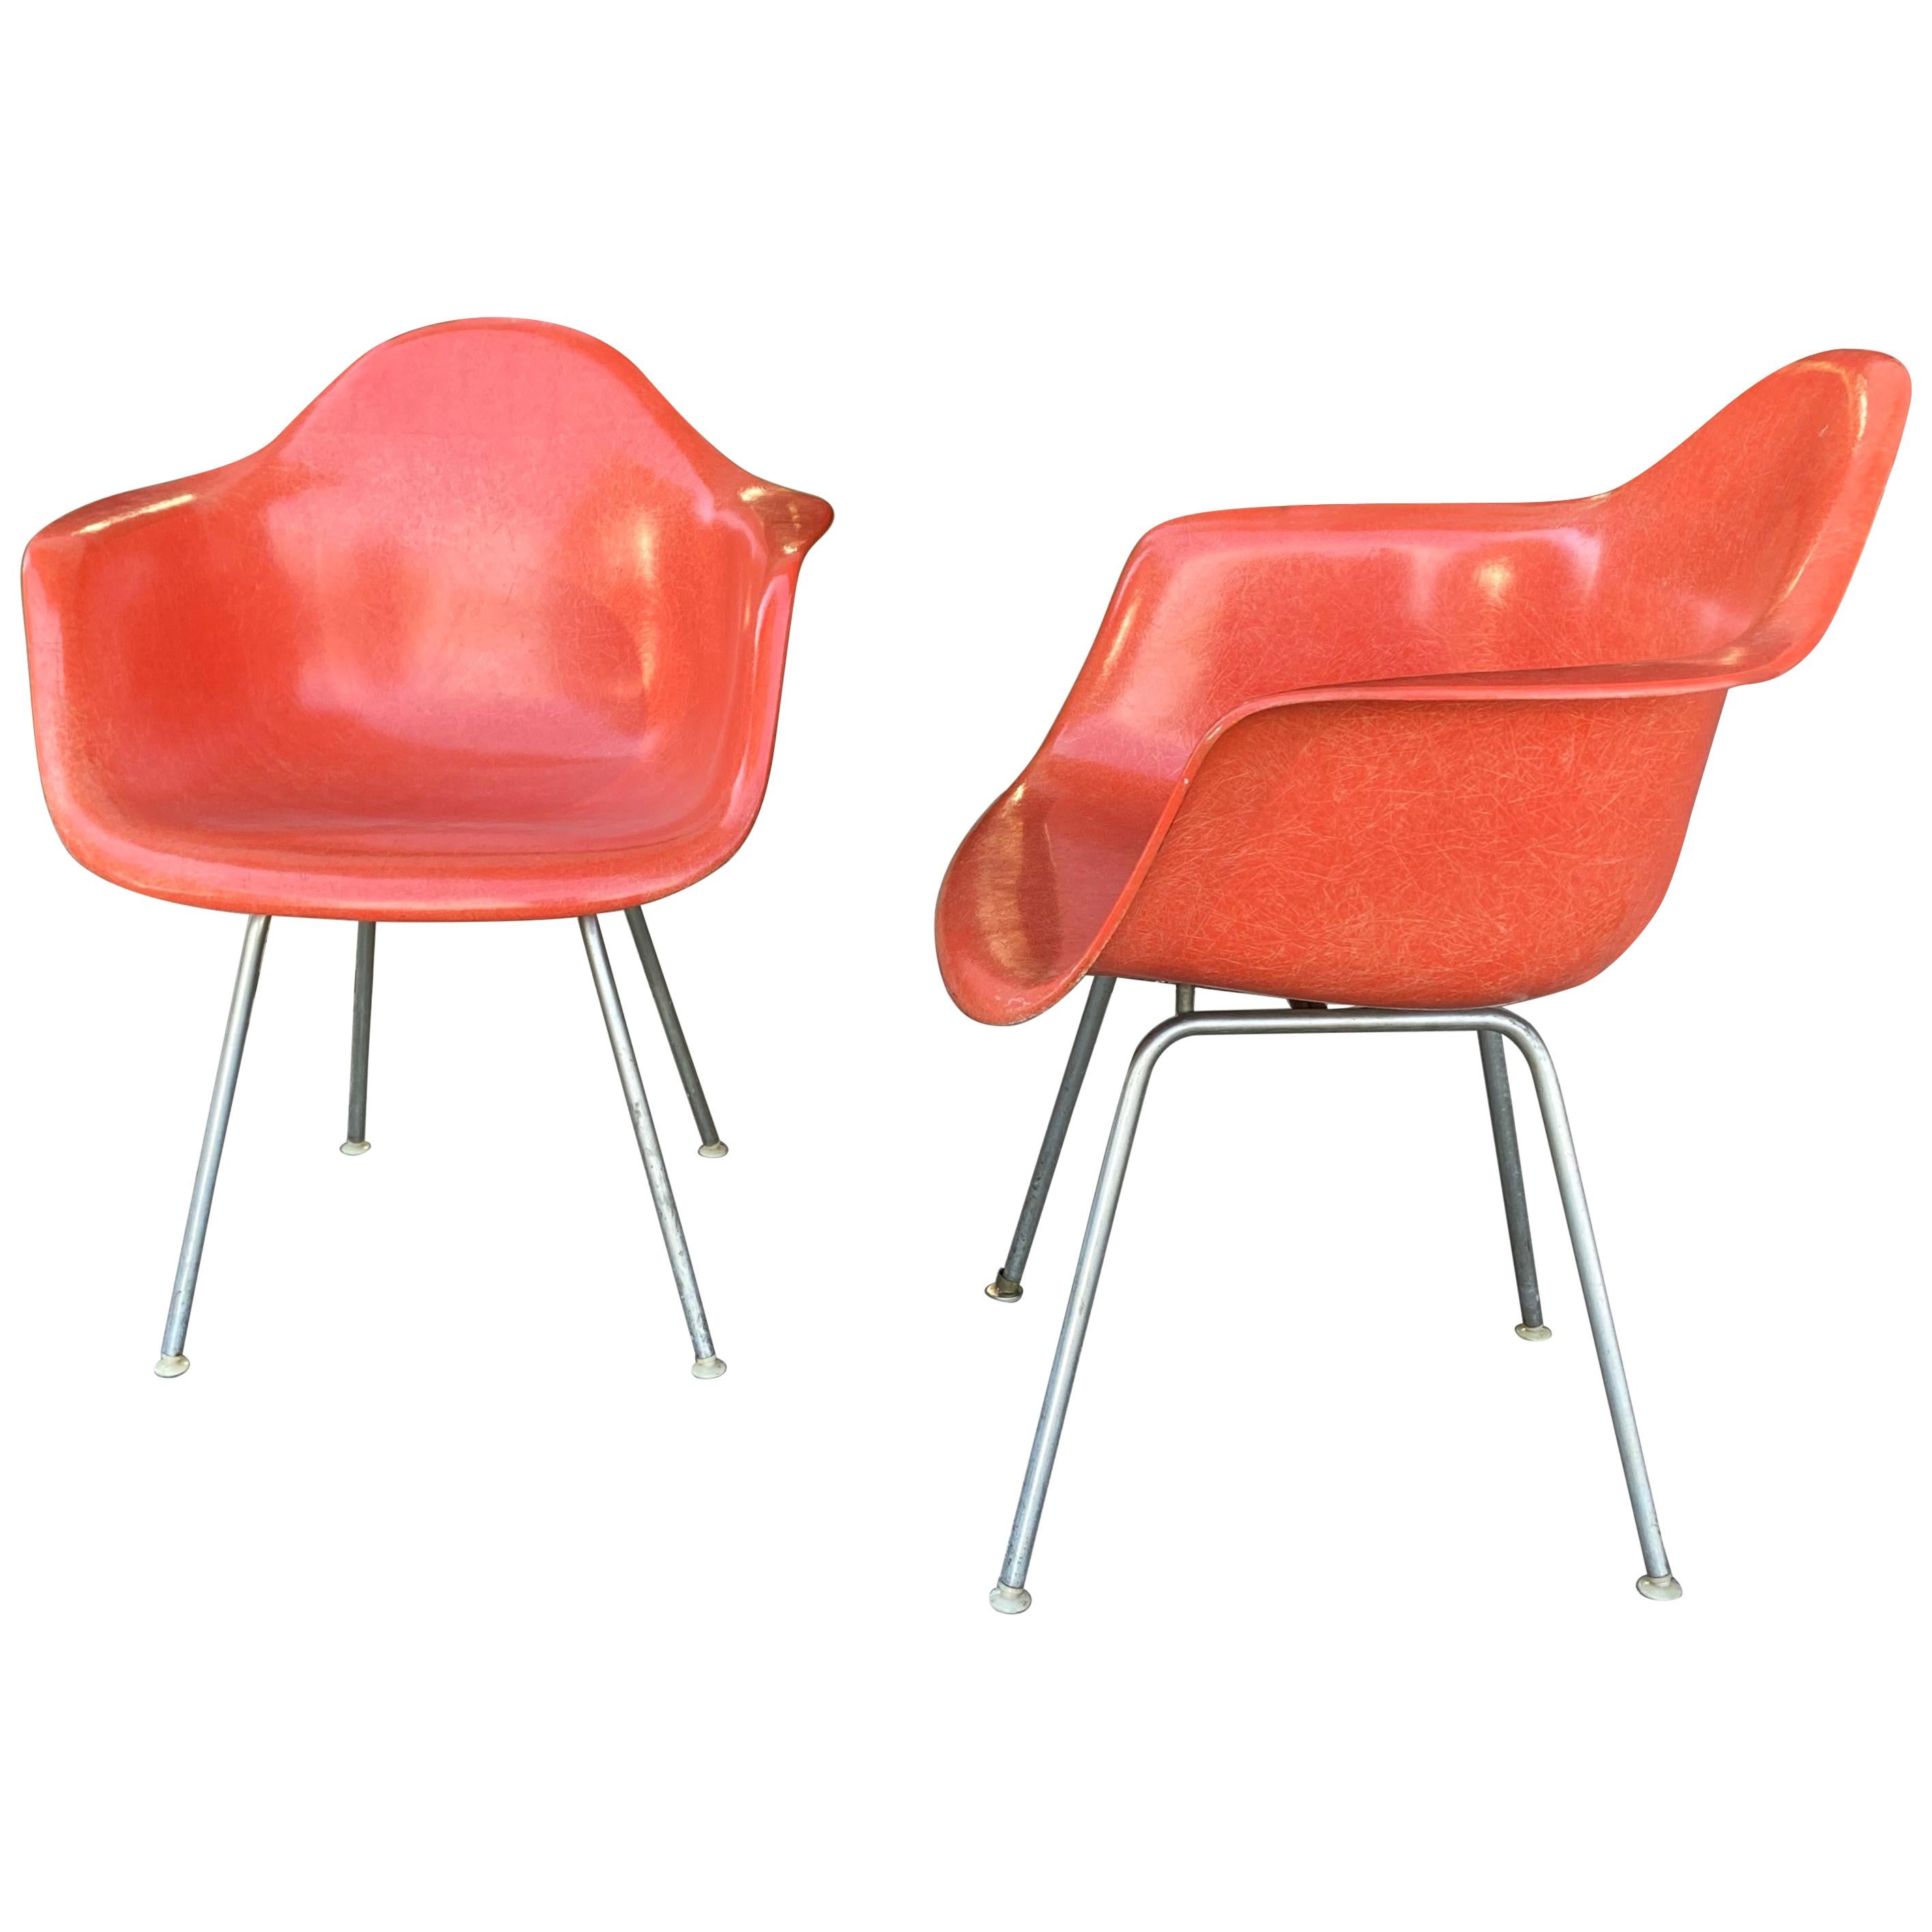 Early Pair of Charles Eames Fiberglass Arm Shell Chairs "Crimson" Herman Miller